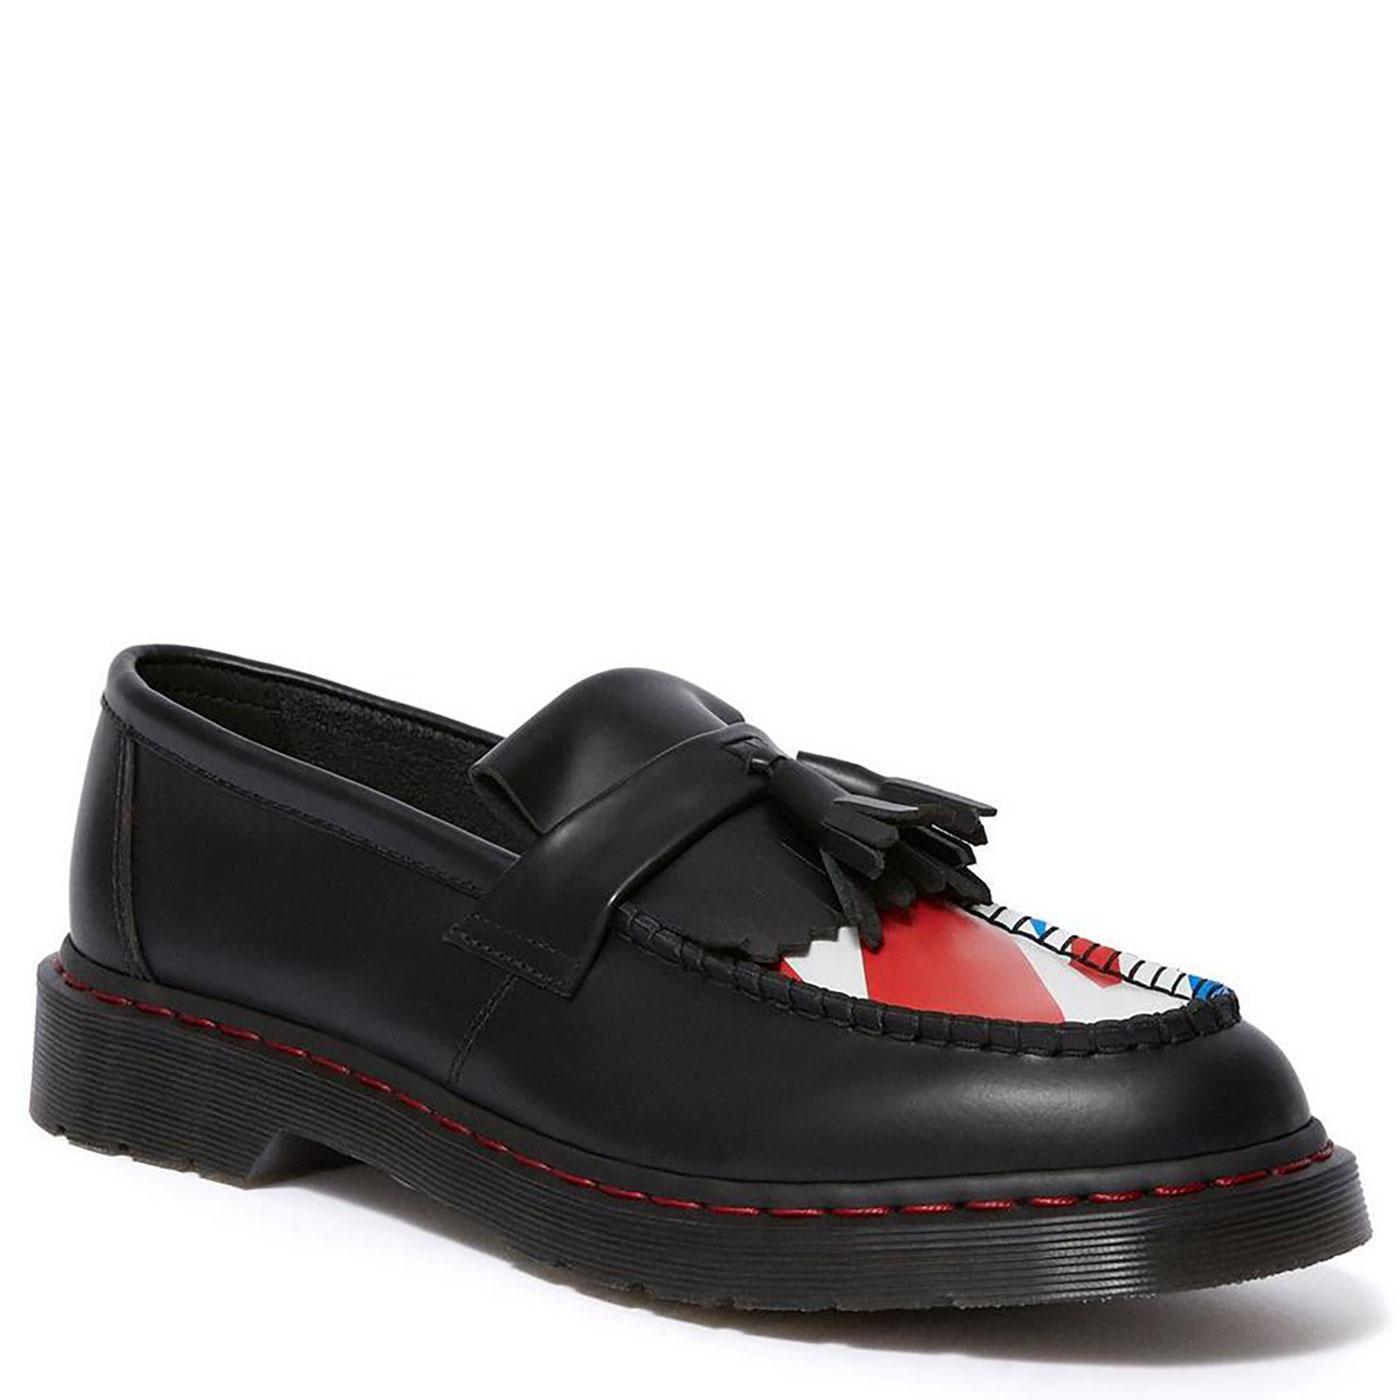 DR MARTENS X THE WHO Women's Union Jack Loafers